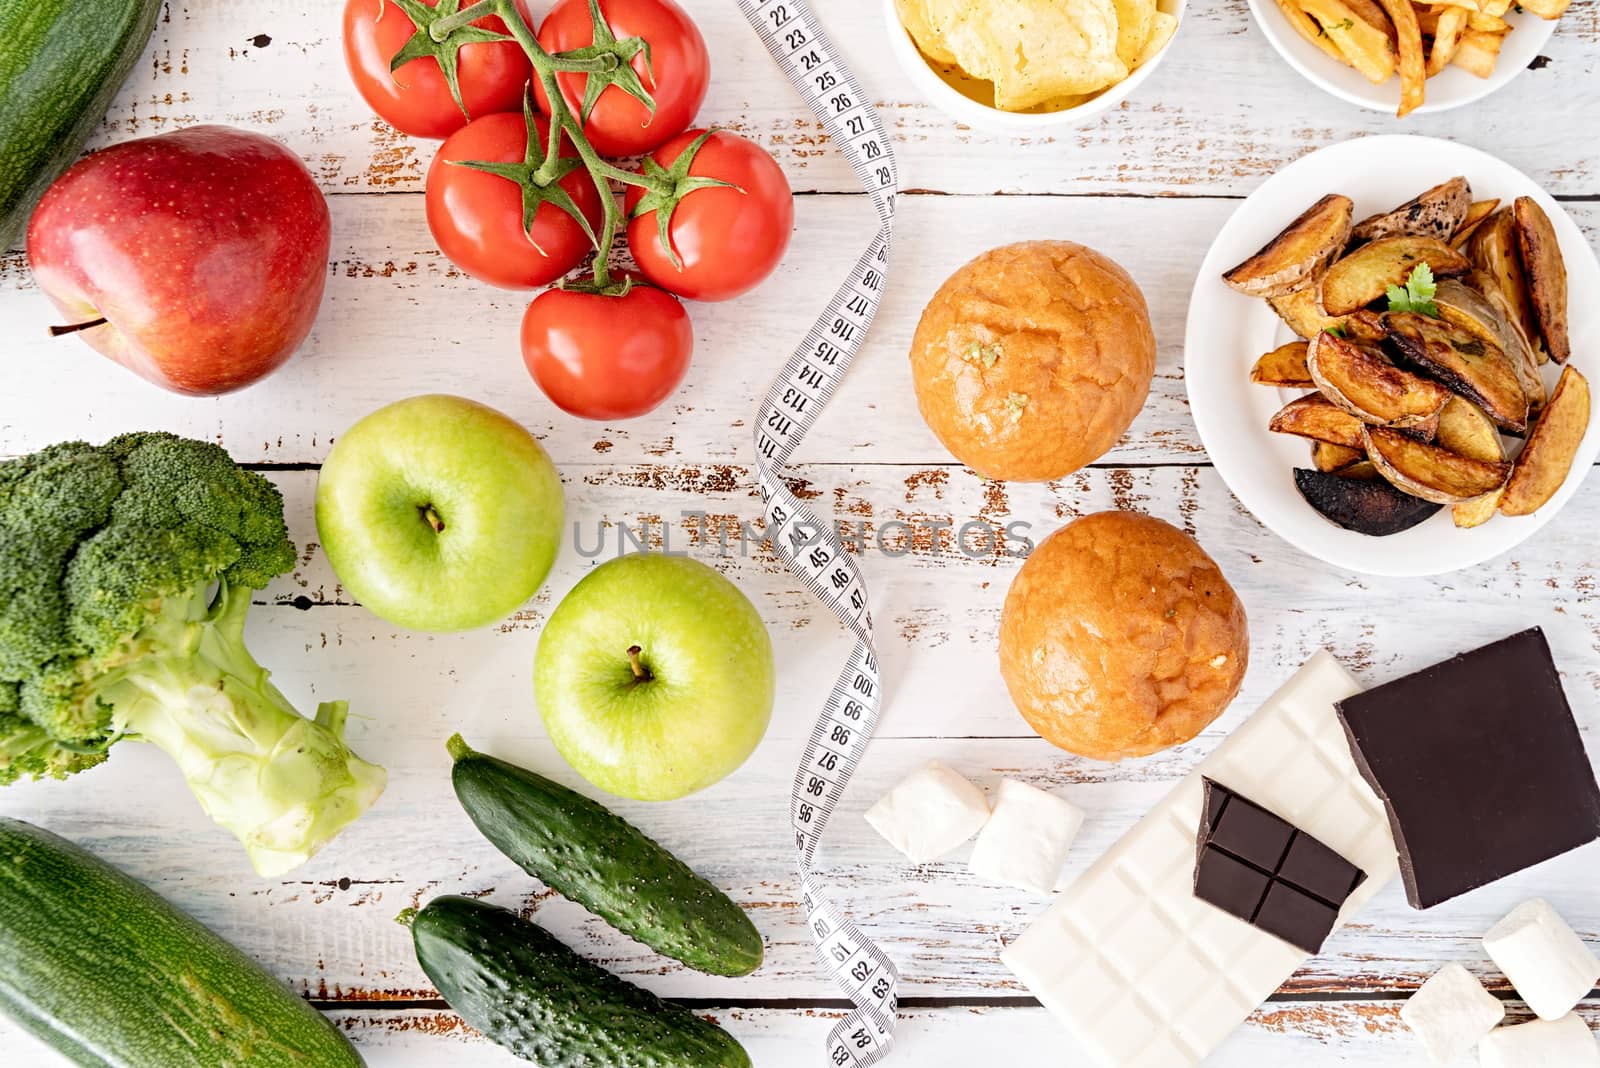 Healthy and unhealthy food concept. Fruit and vegetables vs sweets, burgers and potatoe fries top view flat lay on white rustic background